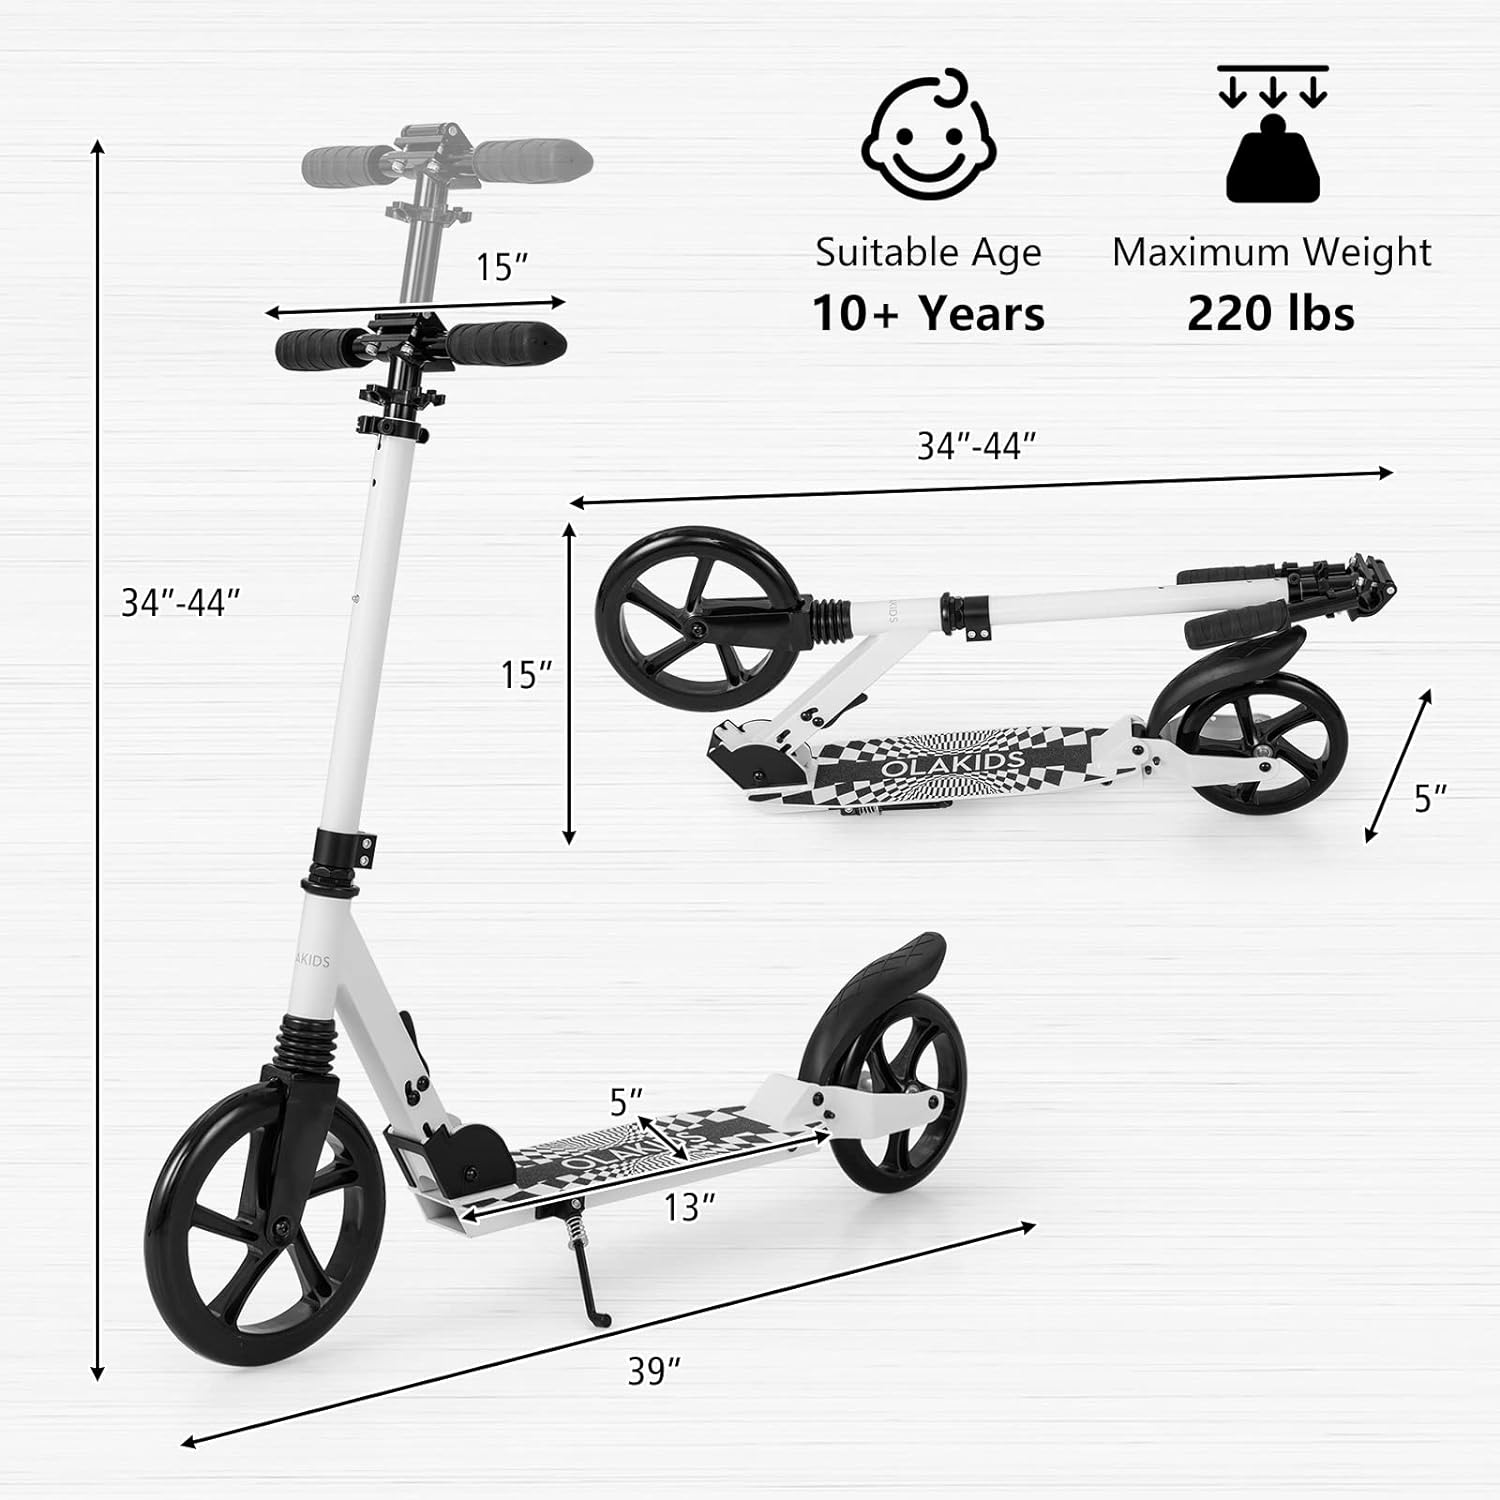 OLAKIDS Kick Scooter Review